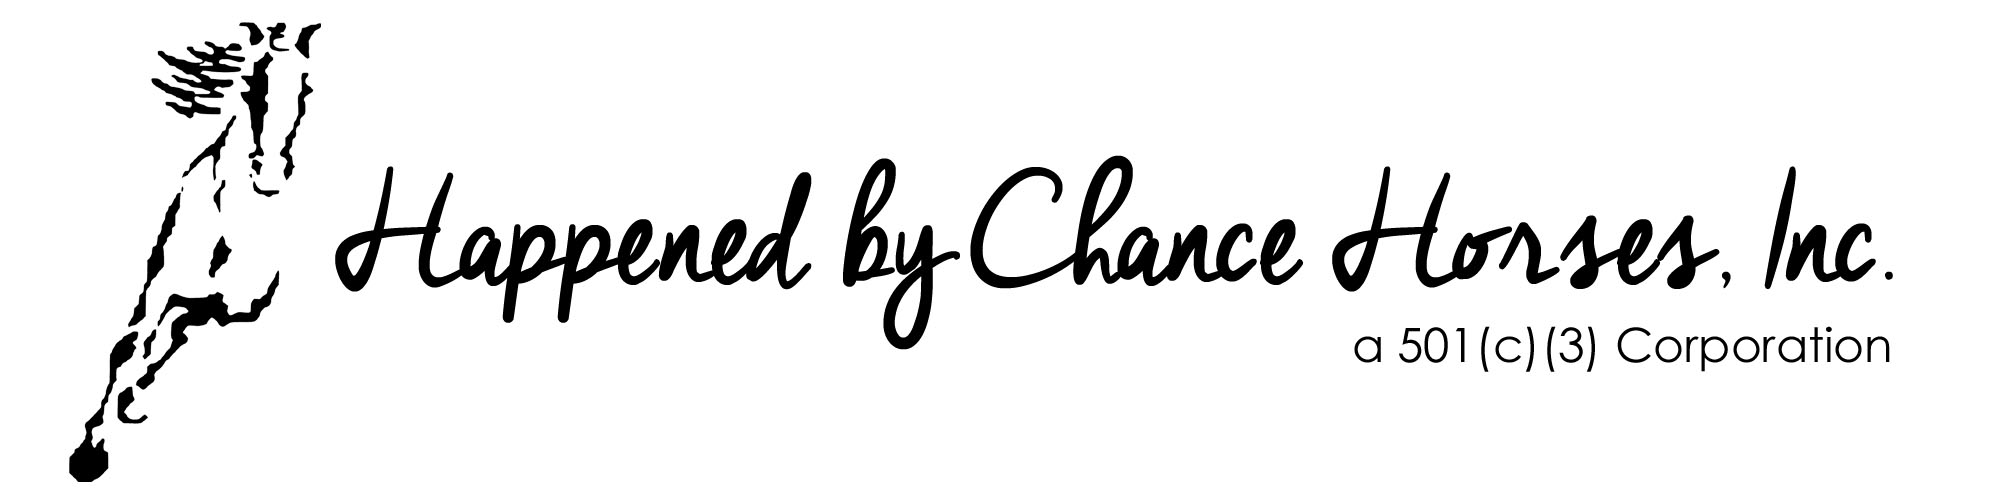 Happened by Chance Horses, Inc. 